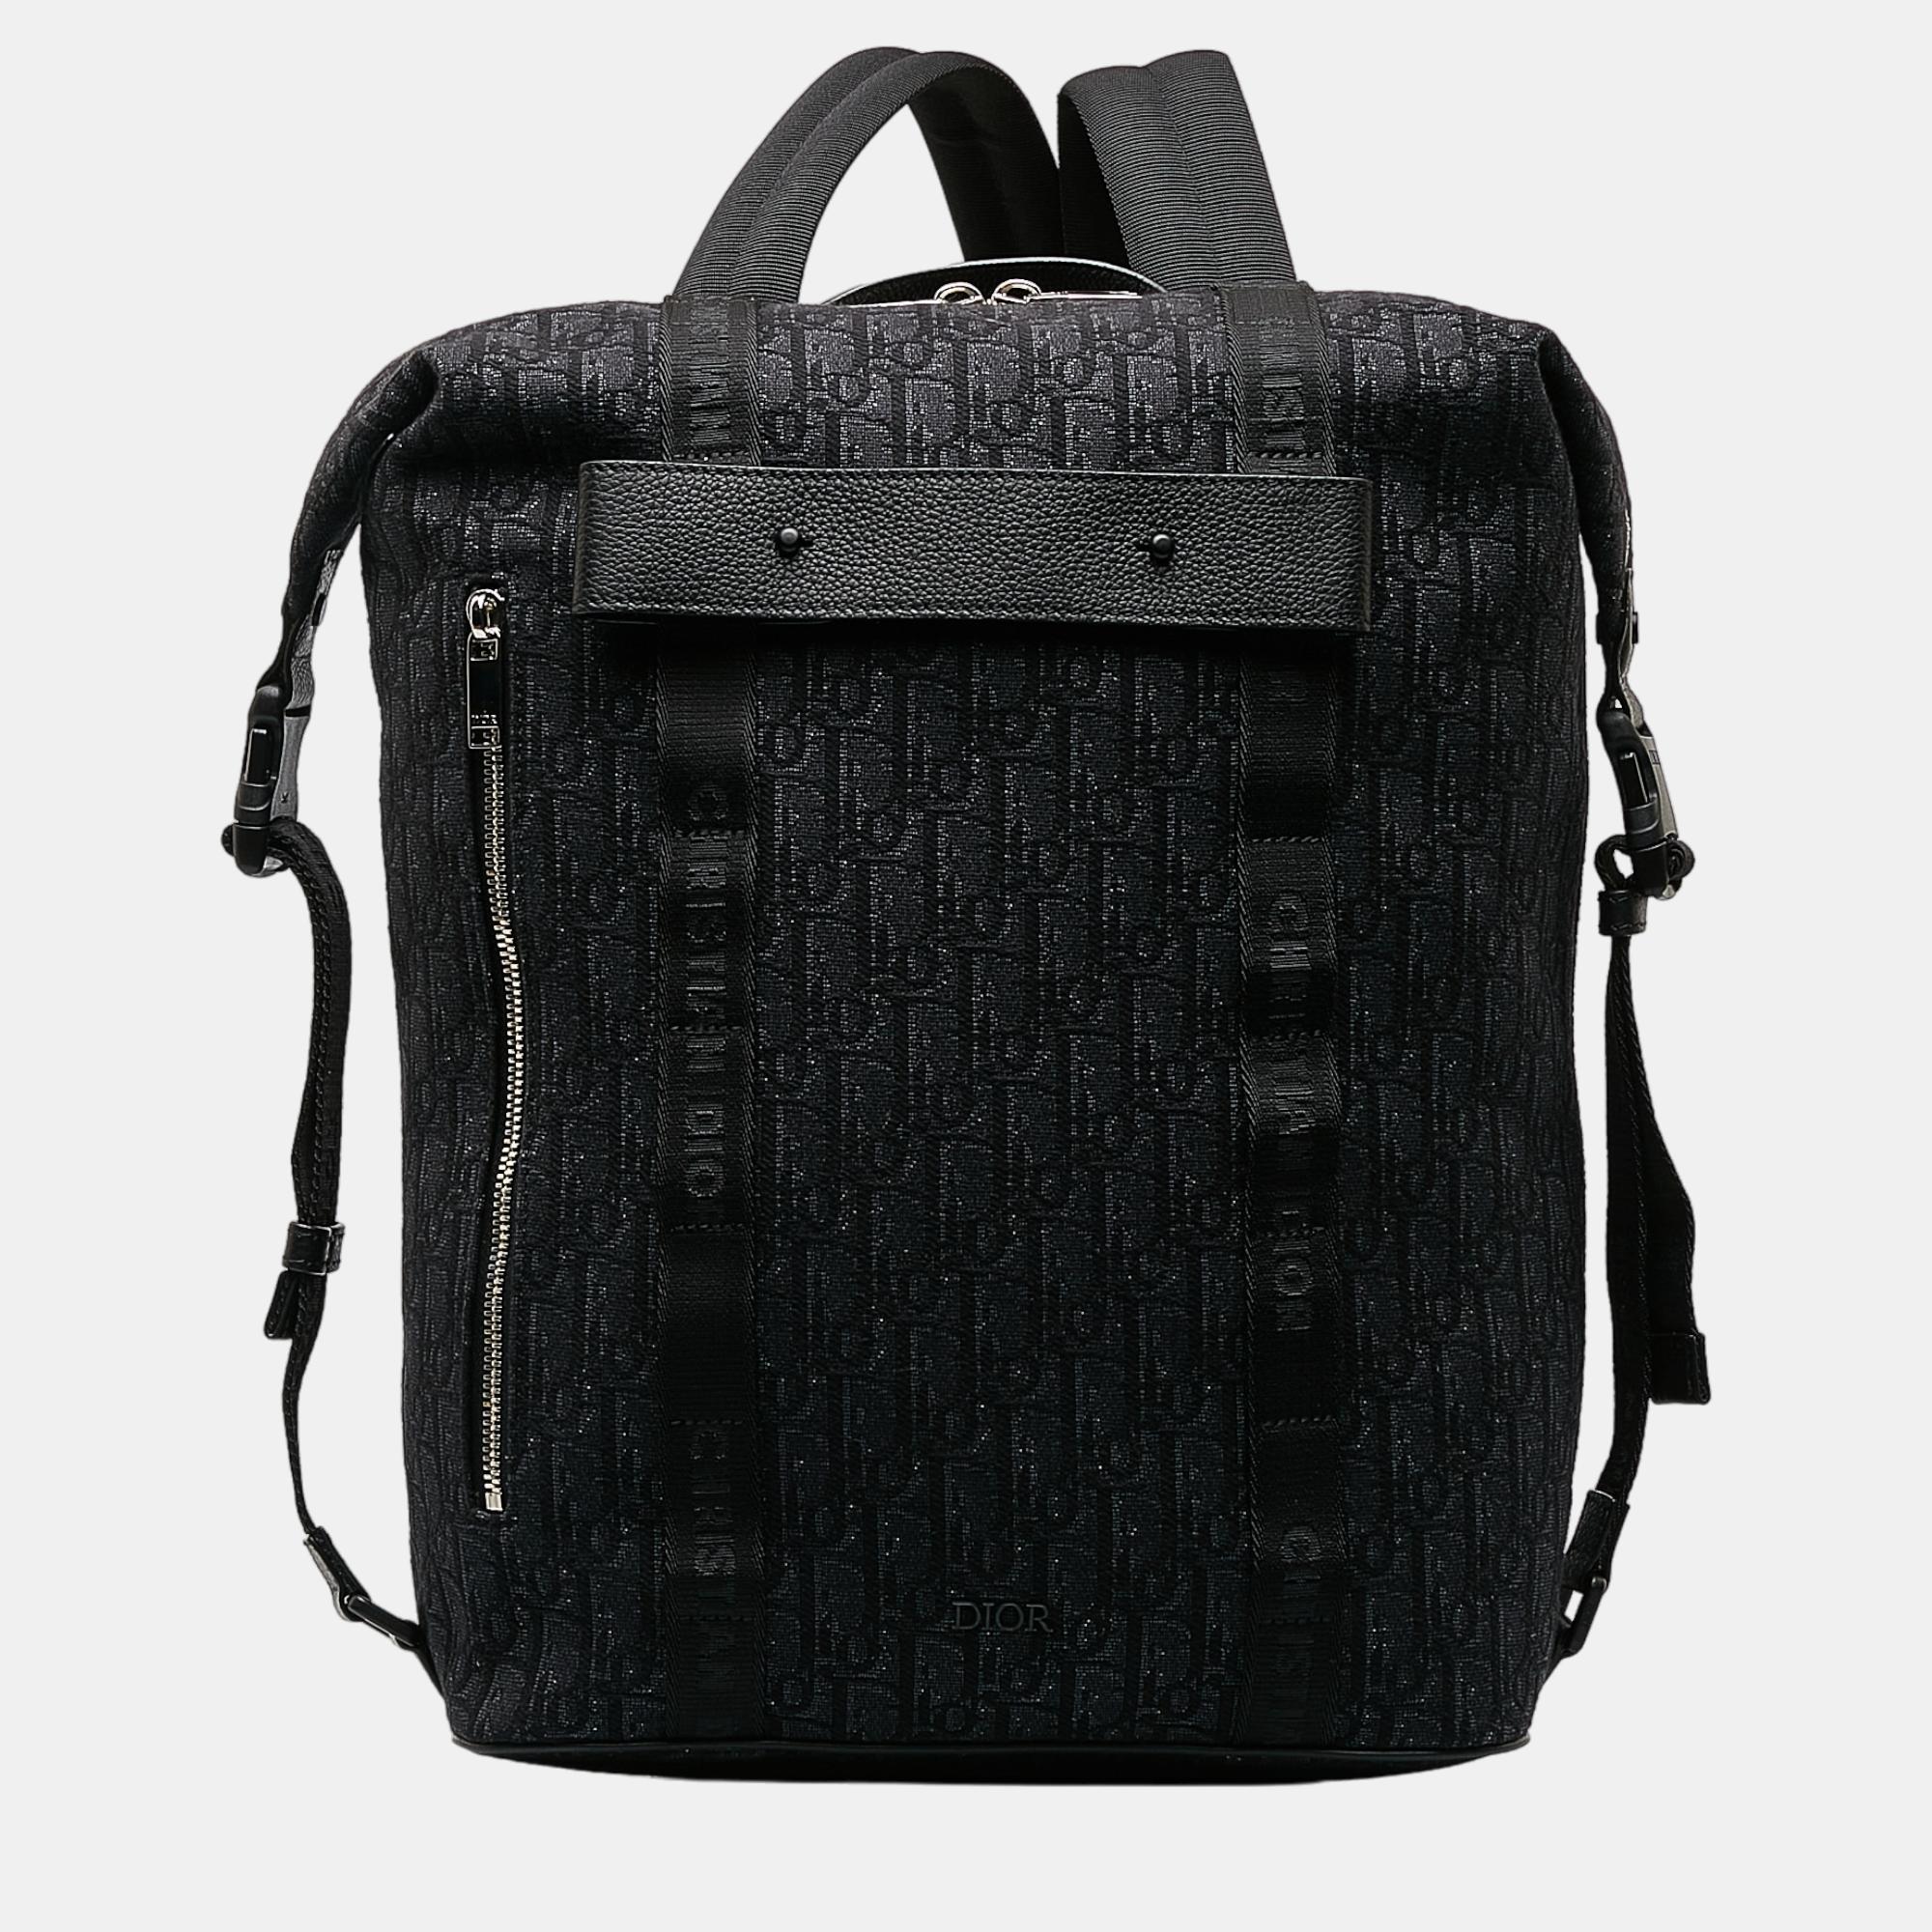 This backpack features a canvas body a flat top handle flat back straps a top zip closure front and back zip pockets and an interior slip pocket